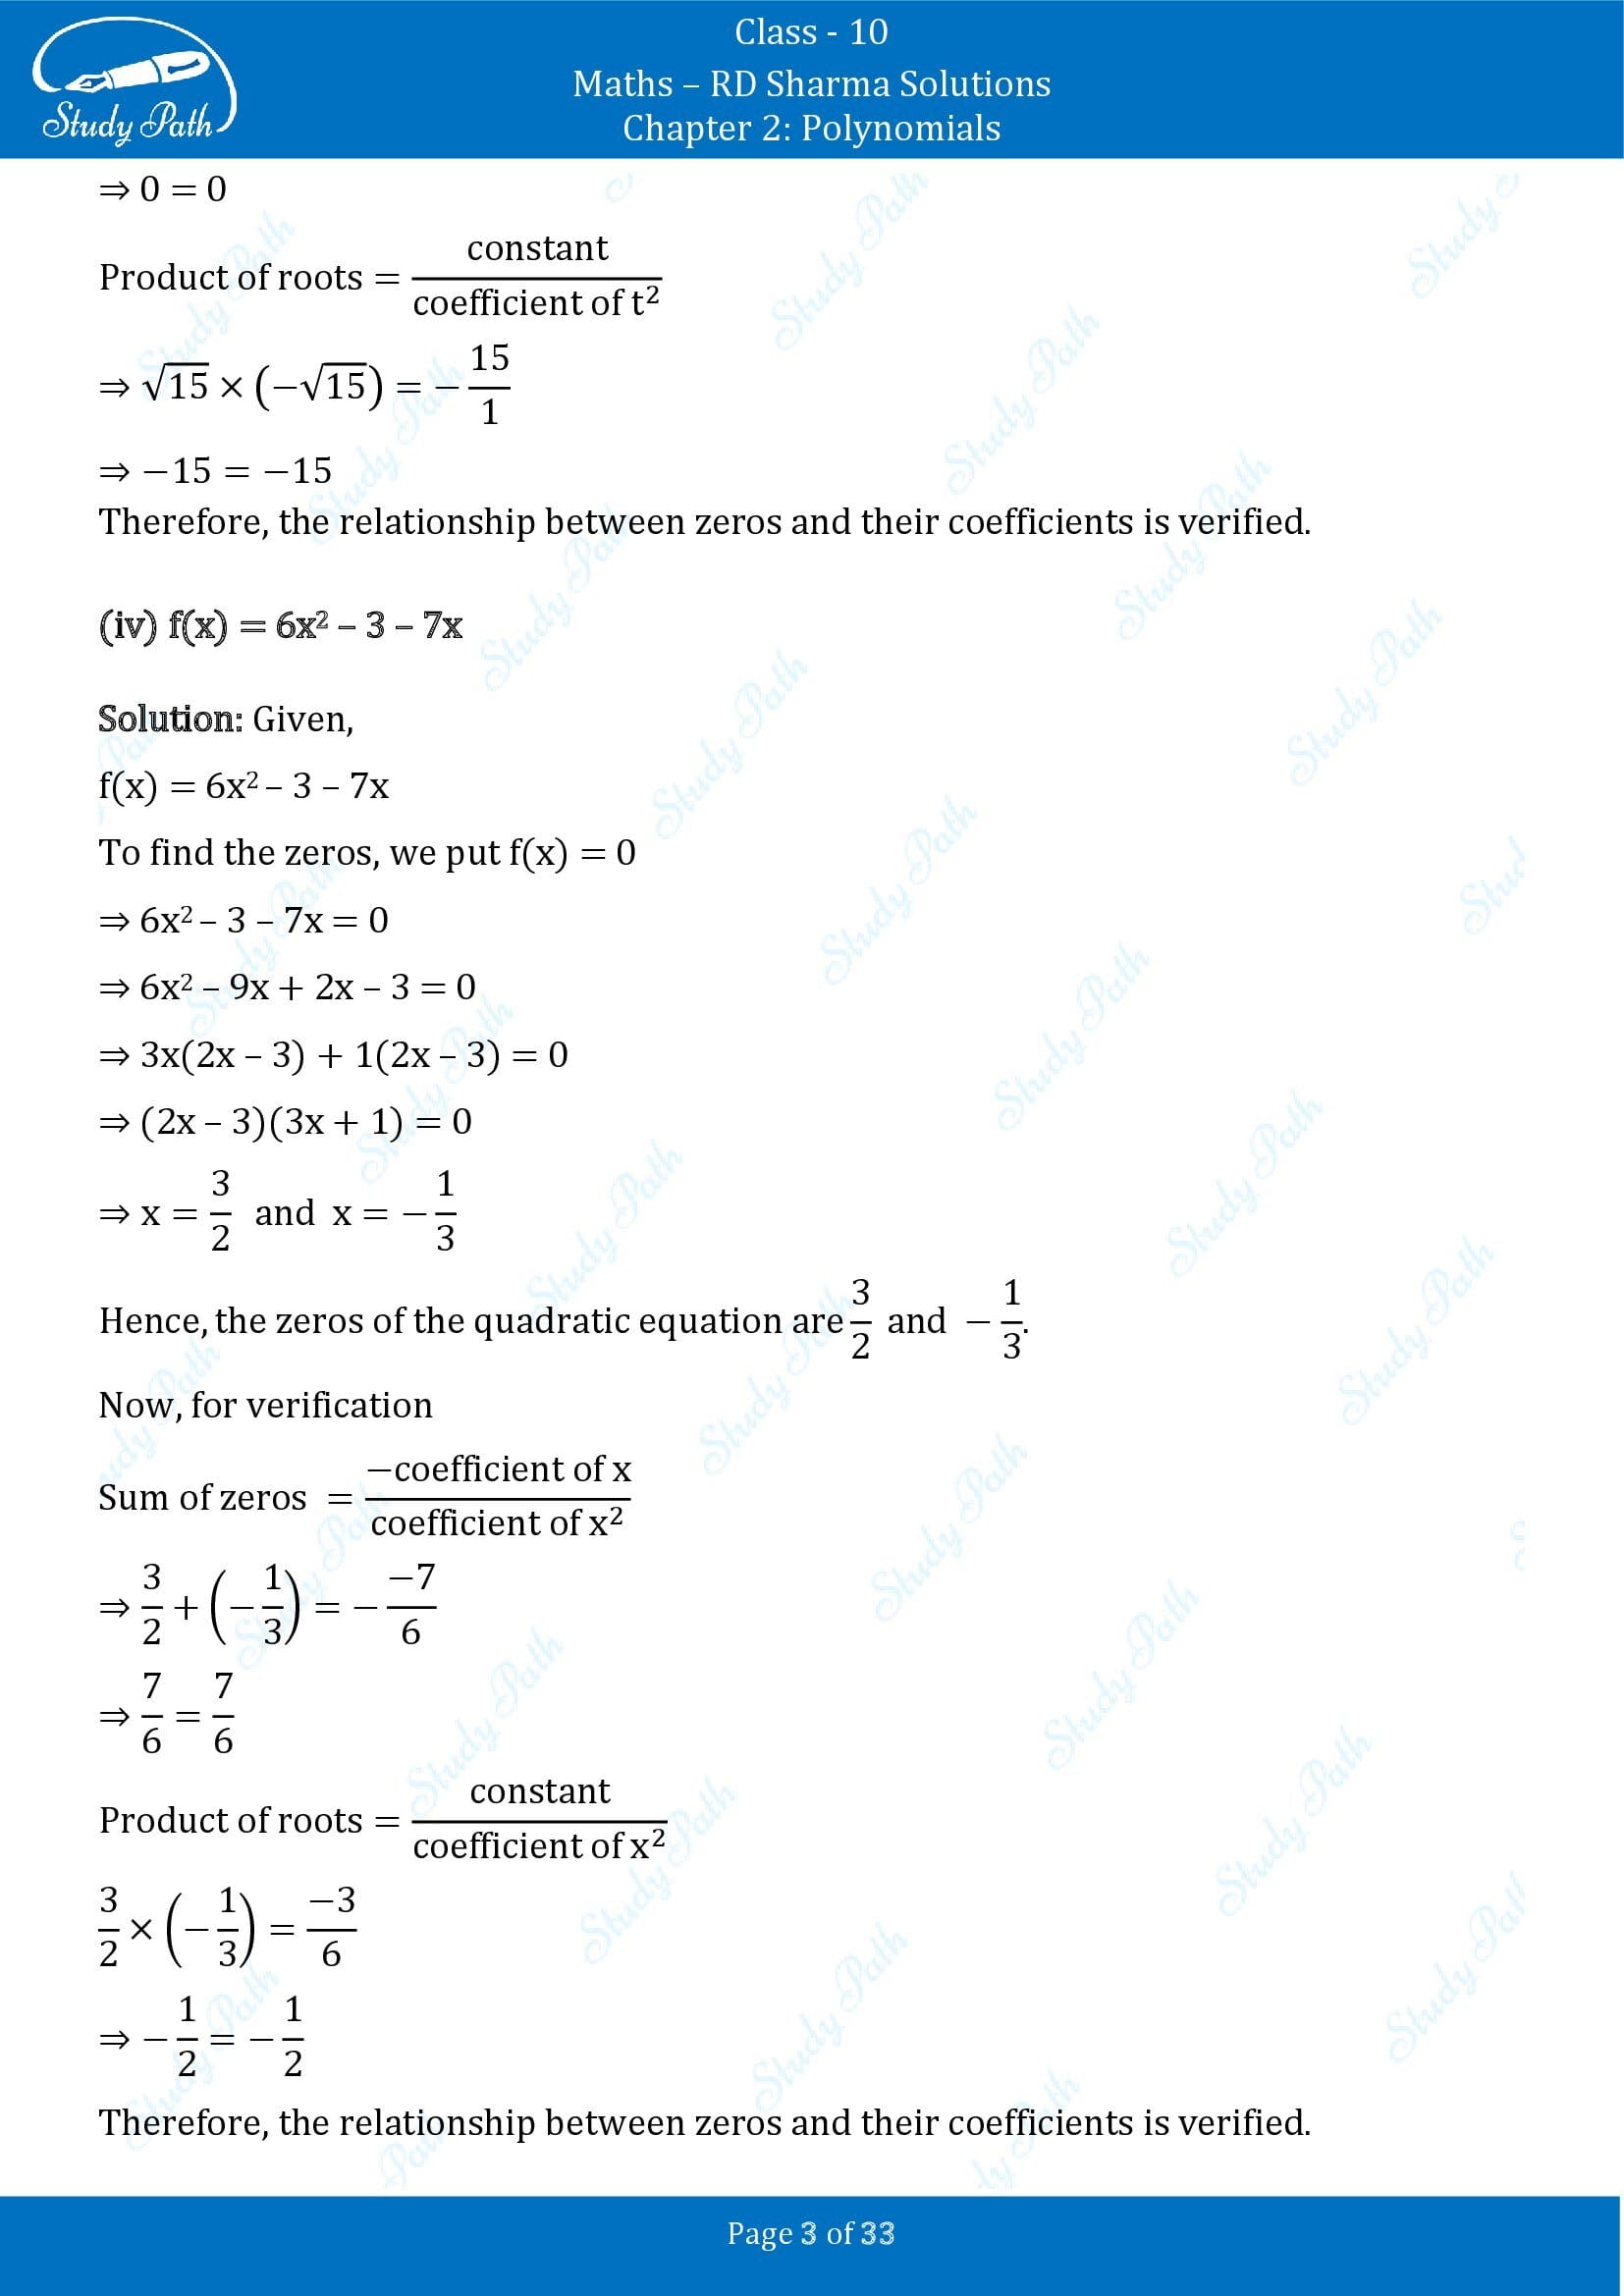 RD Sharma Solutions Class 10 Chapter 2 Polynomials Exercise 2.1 00003